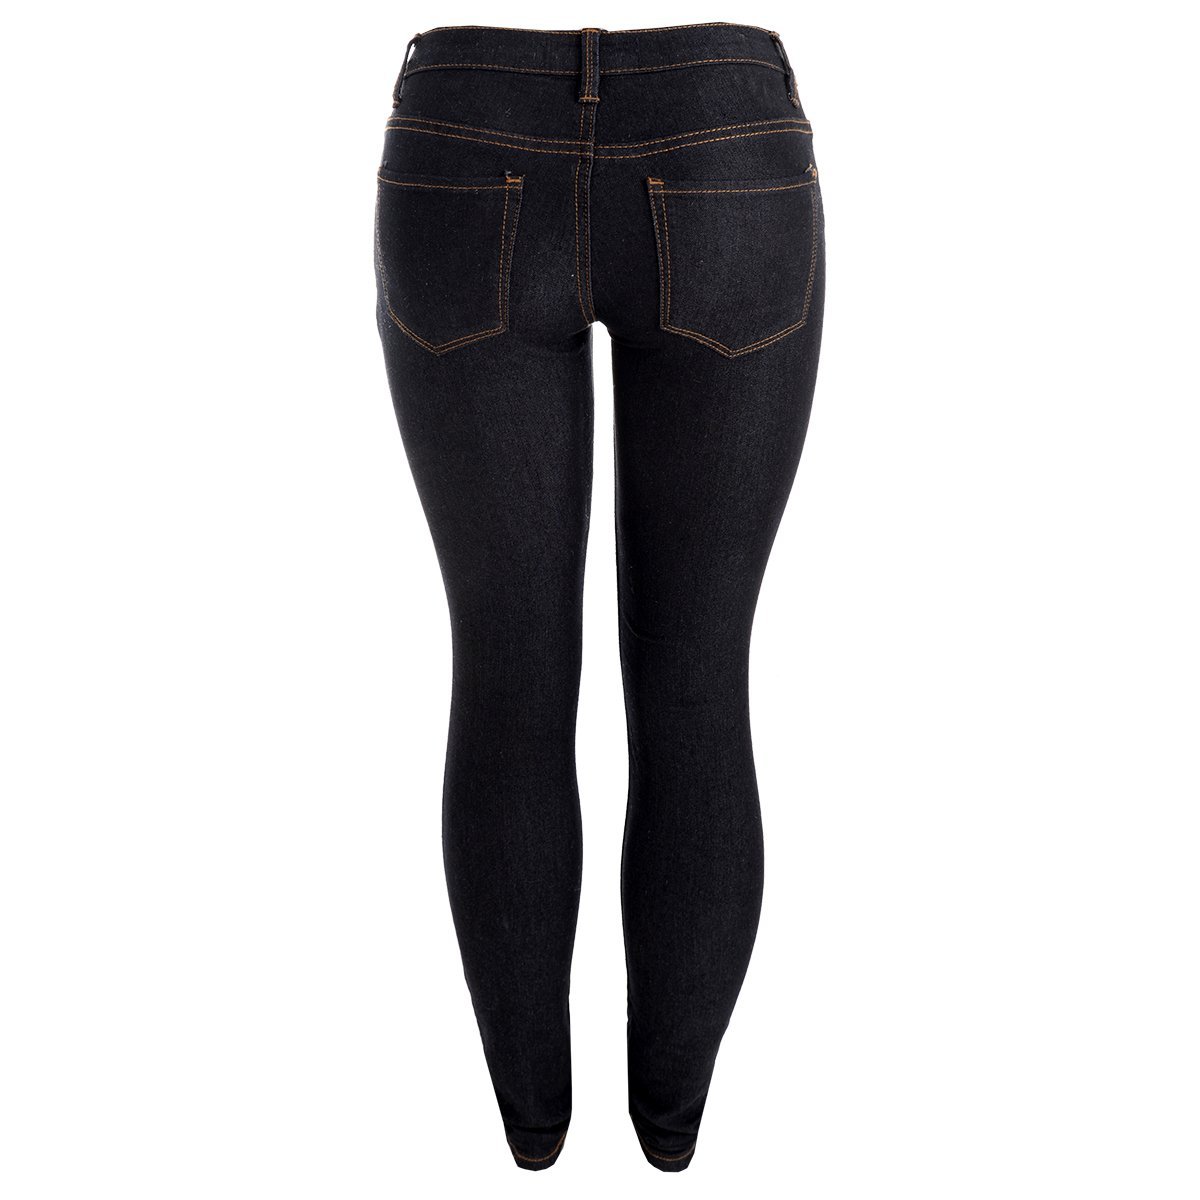 Jeans Corte Skinny Obscuro Philosophy